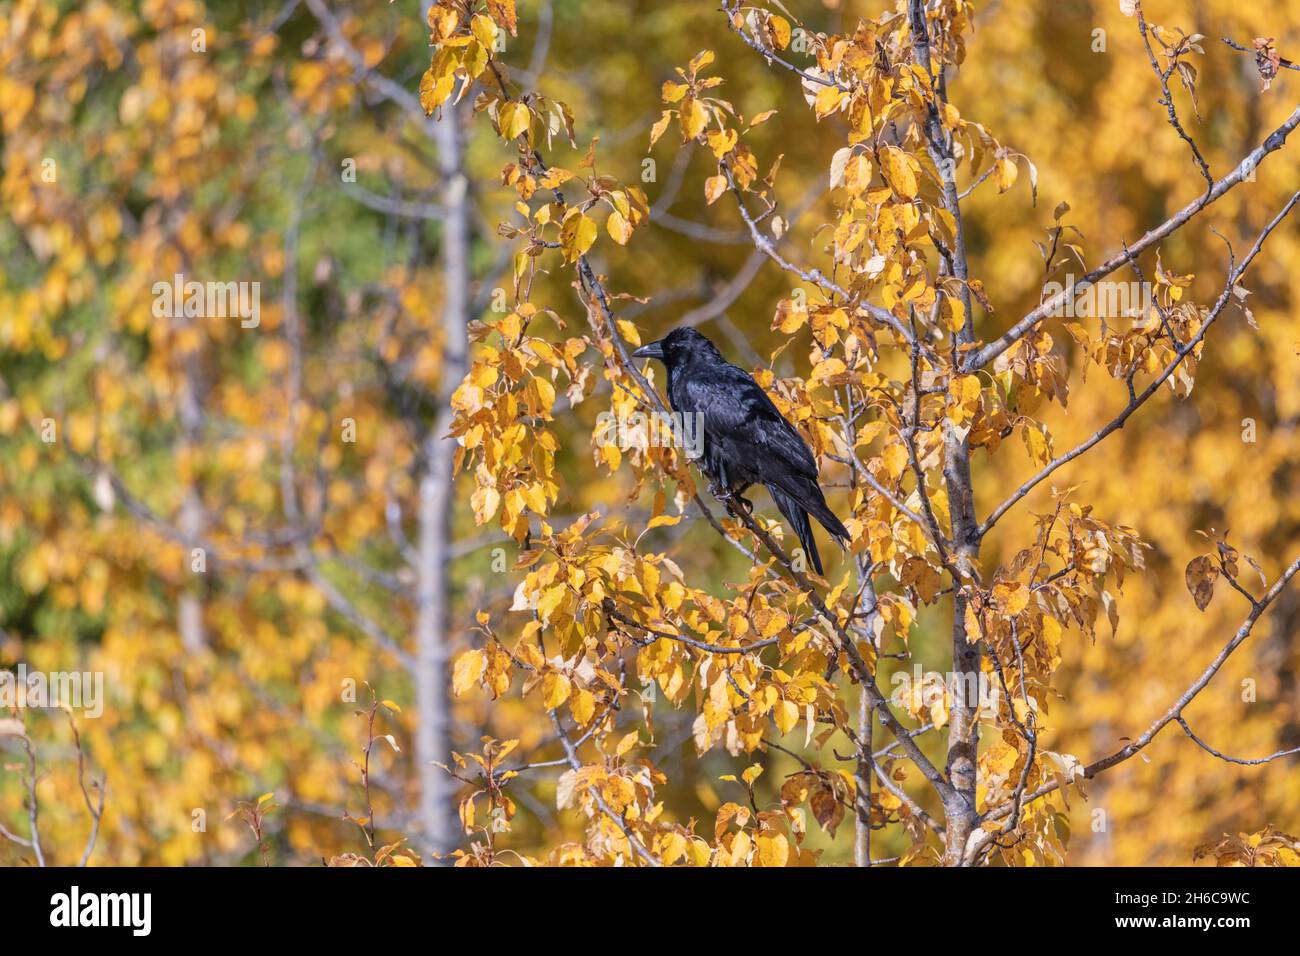 Smart, curious and beautiful black raven seen in the wild with fall, autumn yellow and orange leaf background. Stock Photo